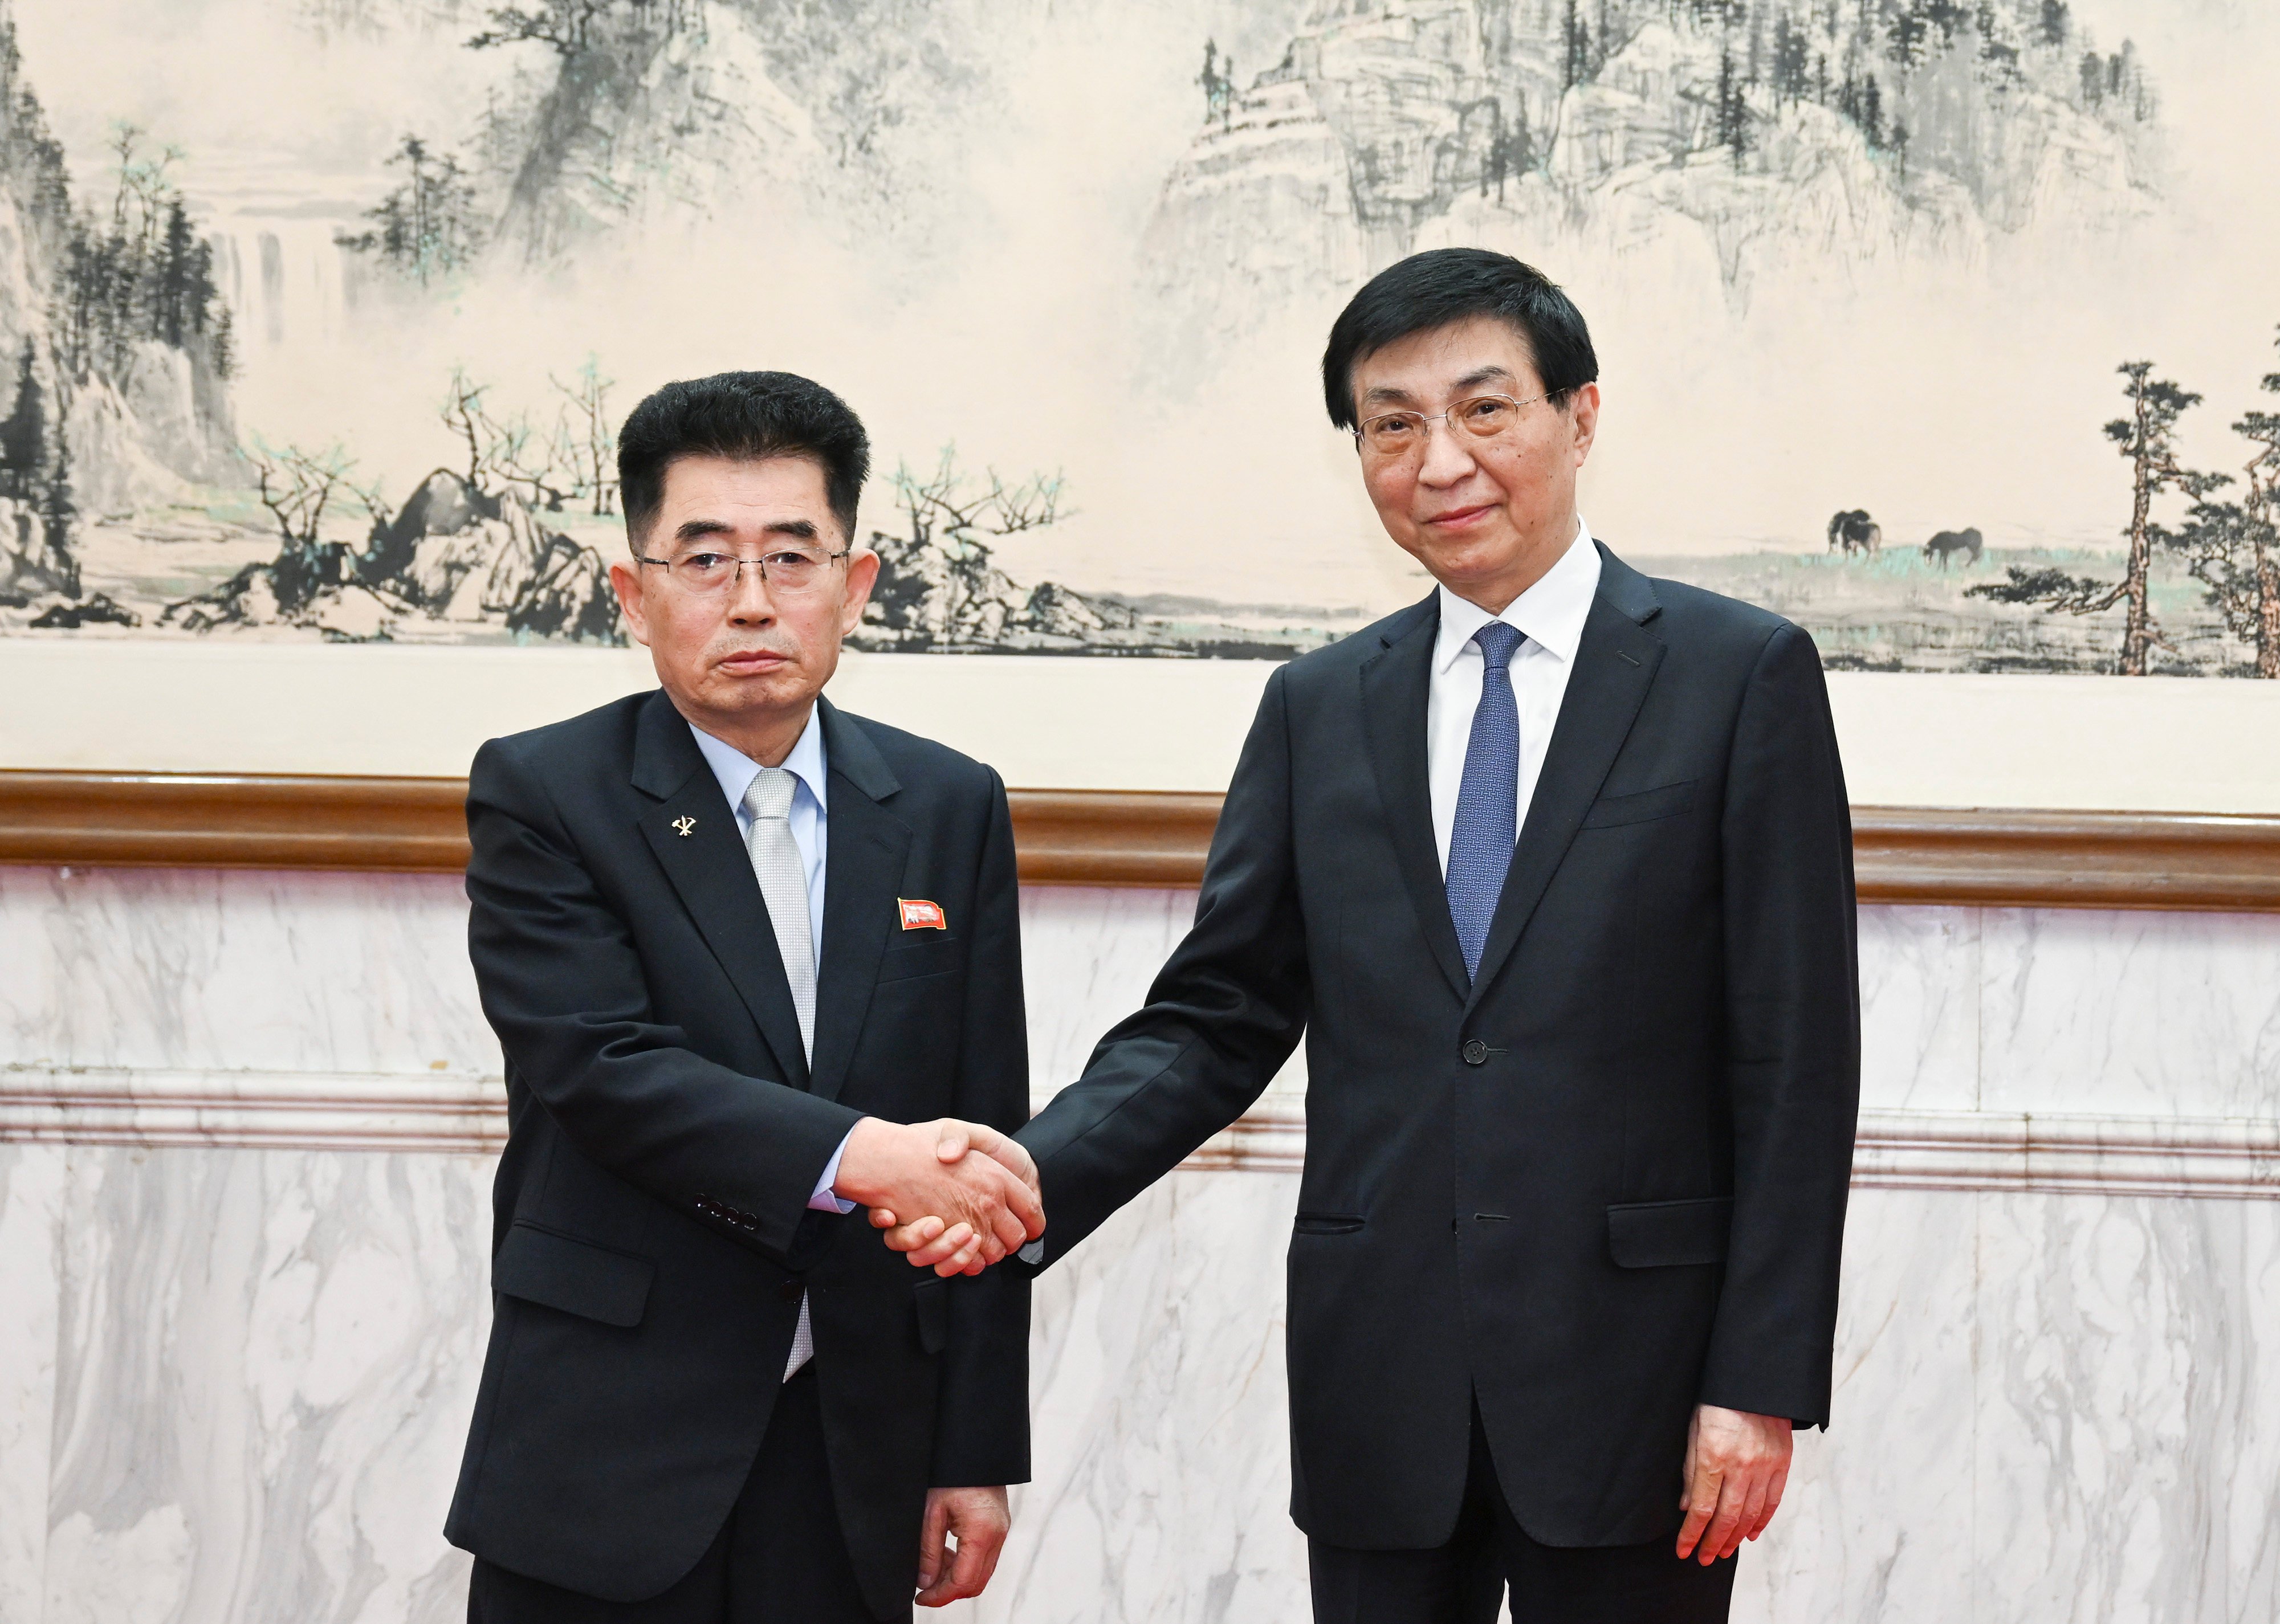 Wang Huning (right), who heads China’s top political advisory body, meets Kim Song-nam, director of the international department of the Workers’ Party of Korea, in Beijing on Thursday. Photo: Xinhua